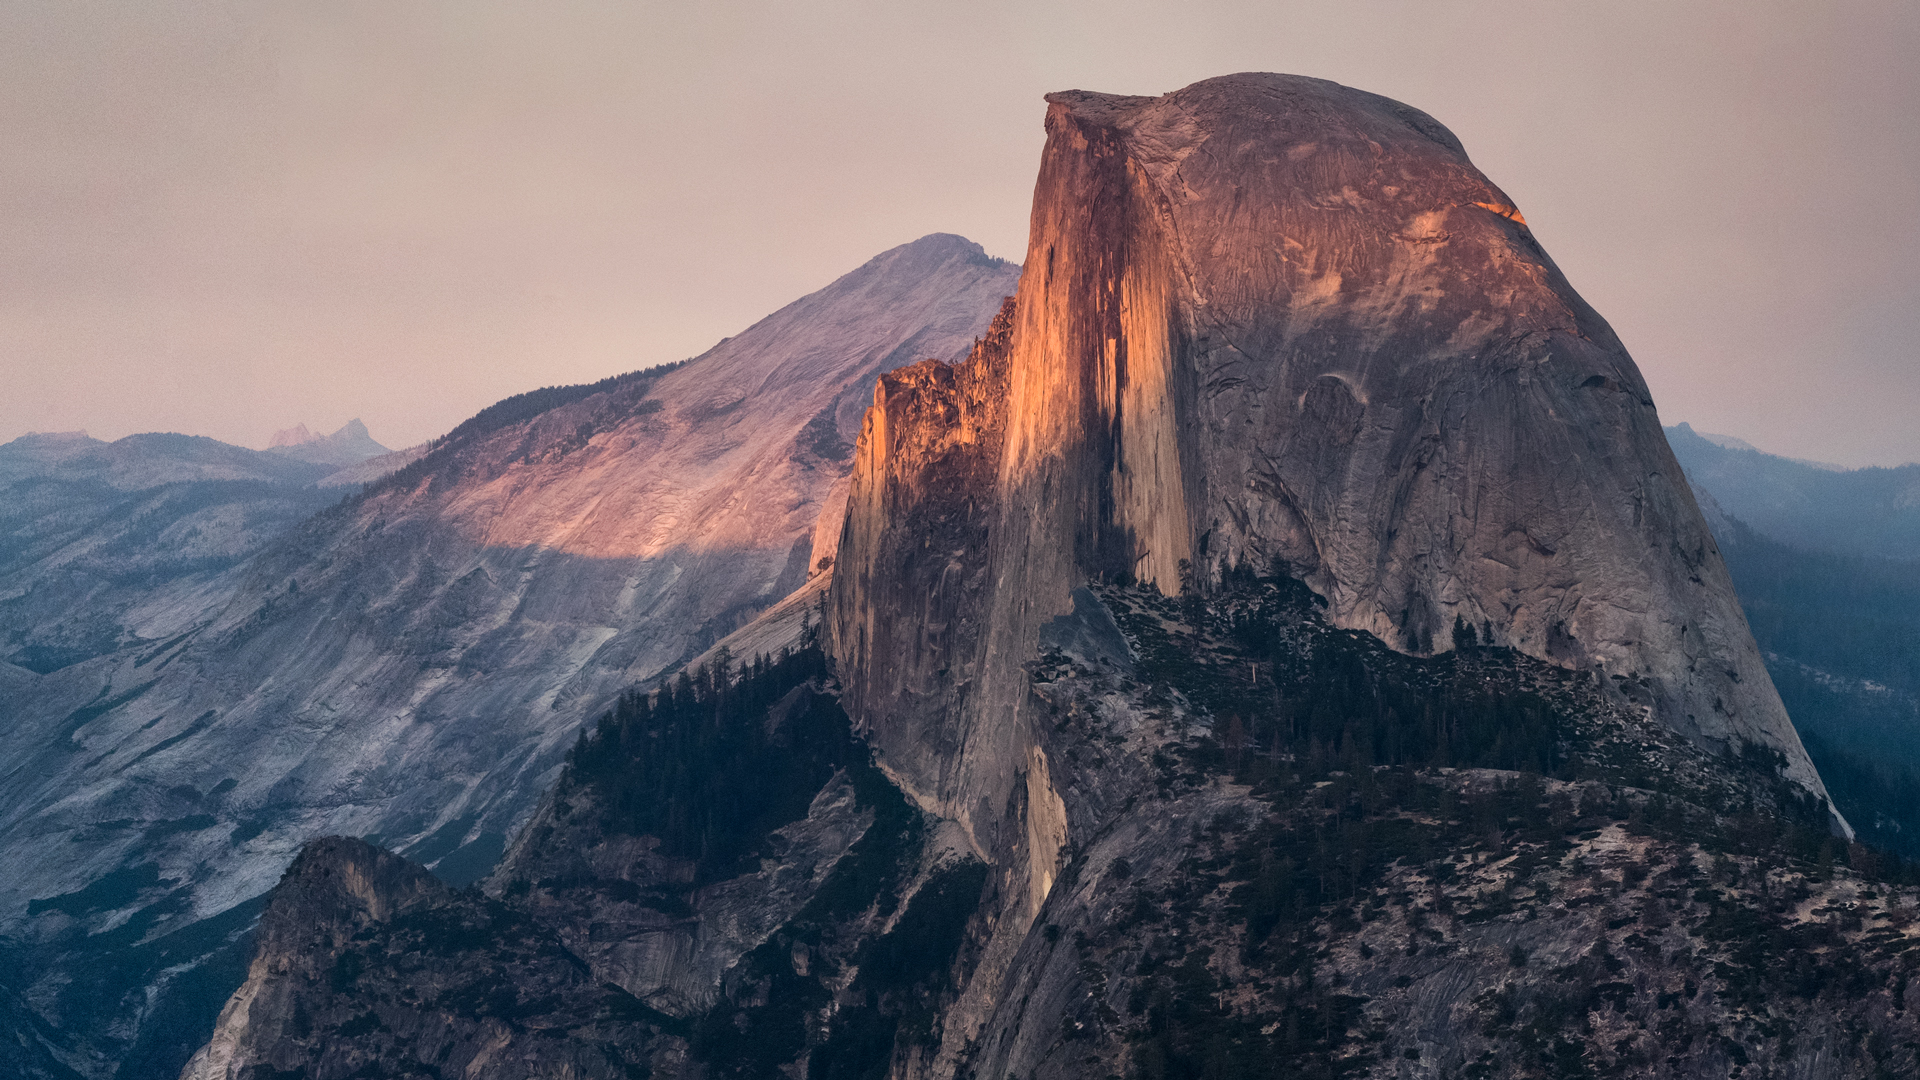 General 1920x1080 sunset mountains landscape Half Dome rocks rock formation California nature USA